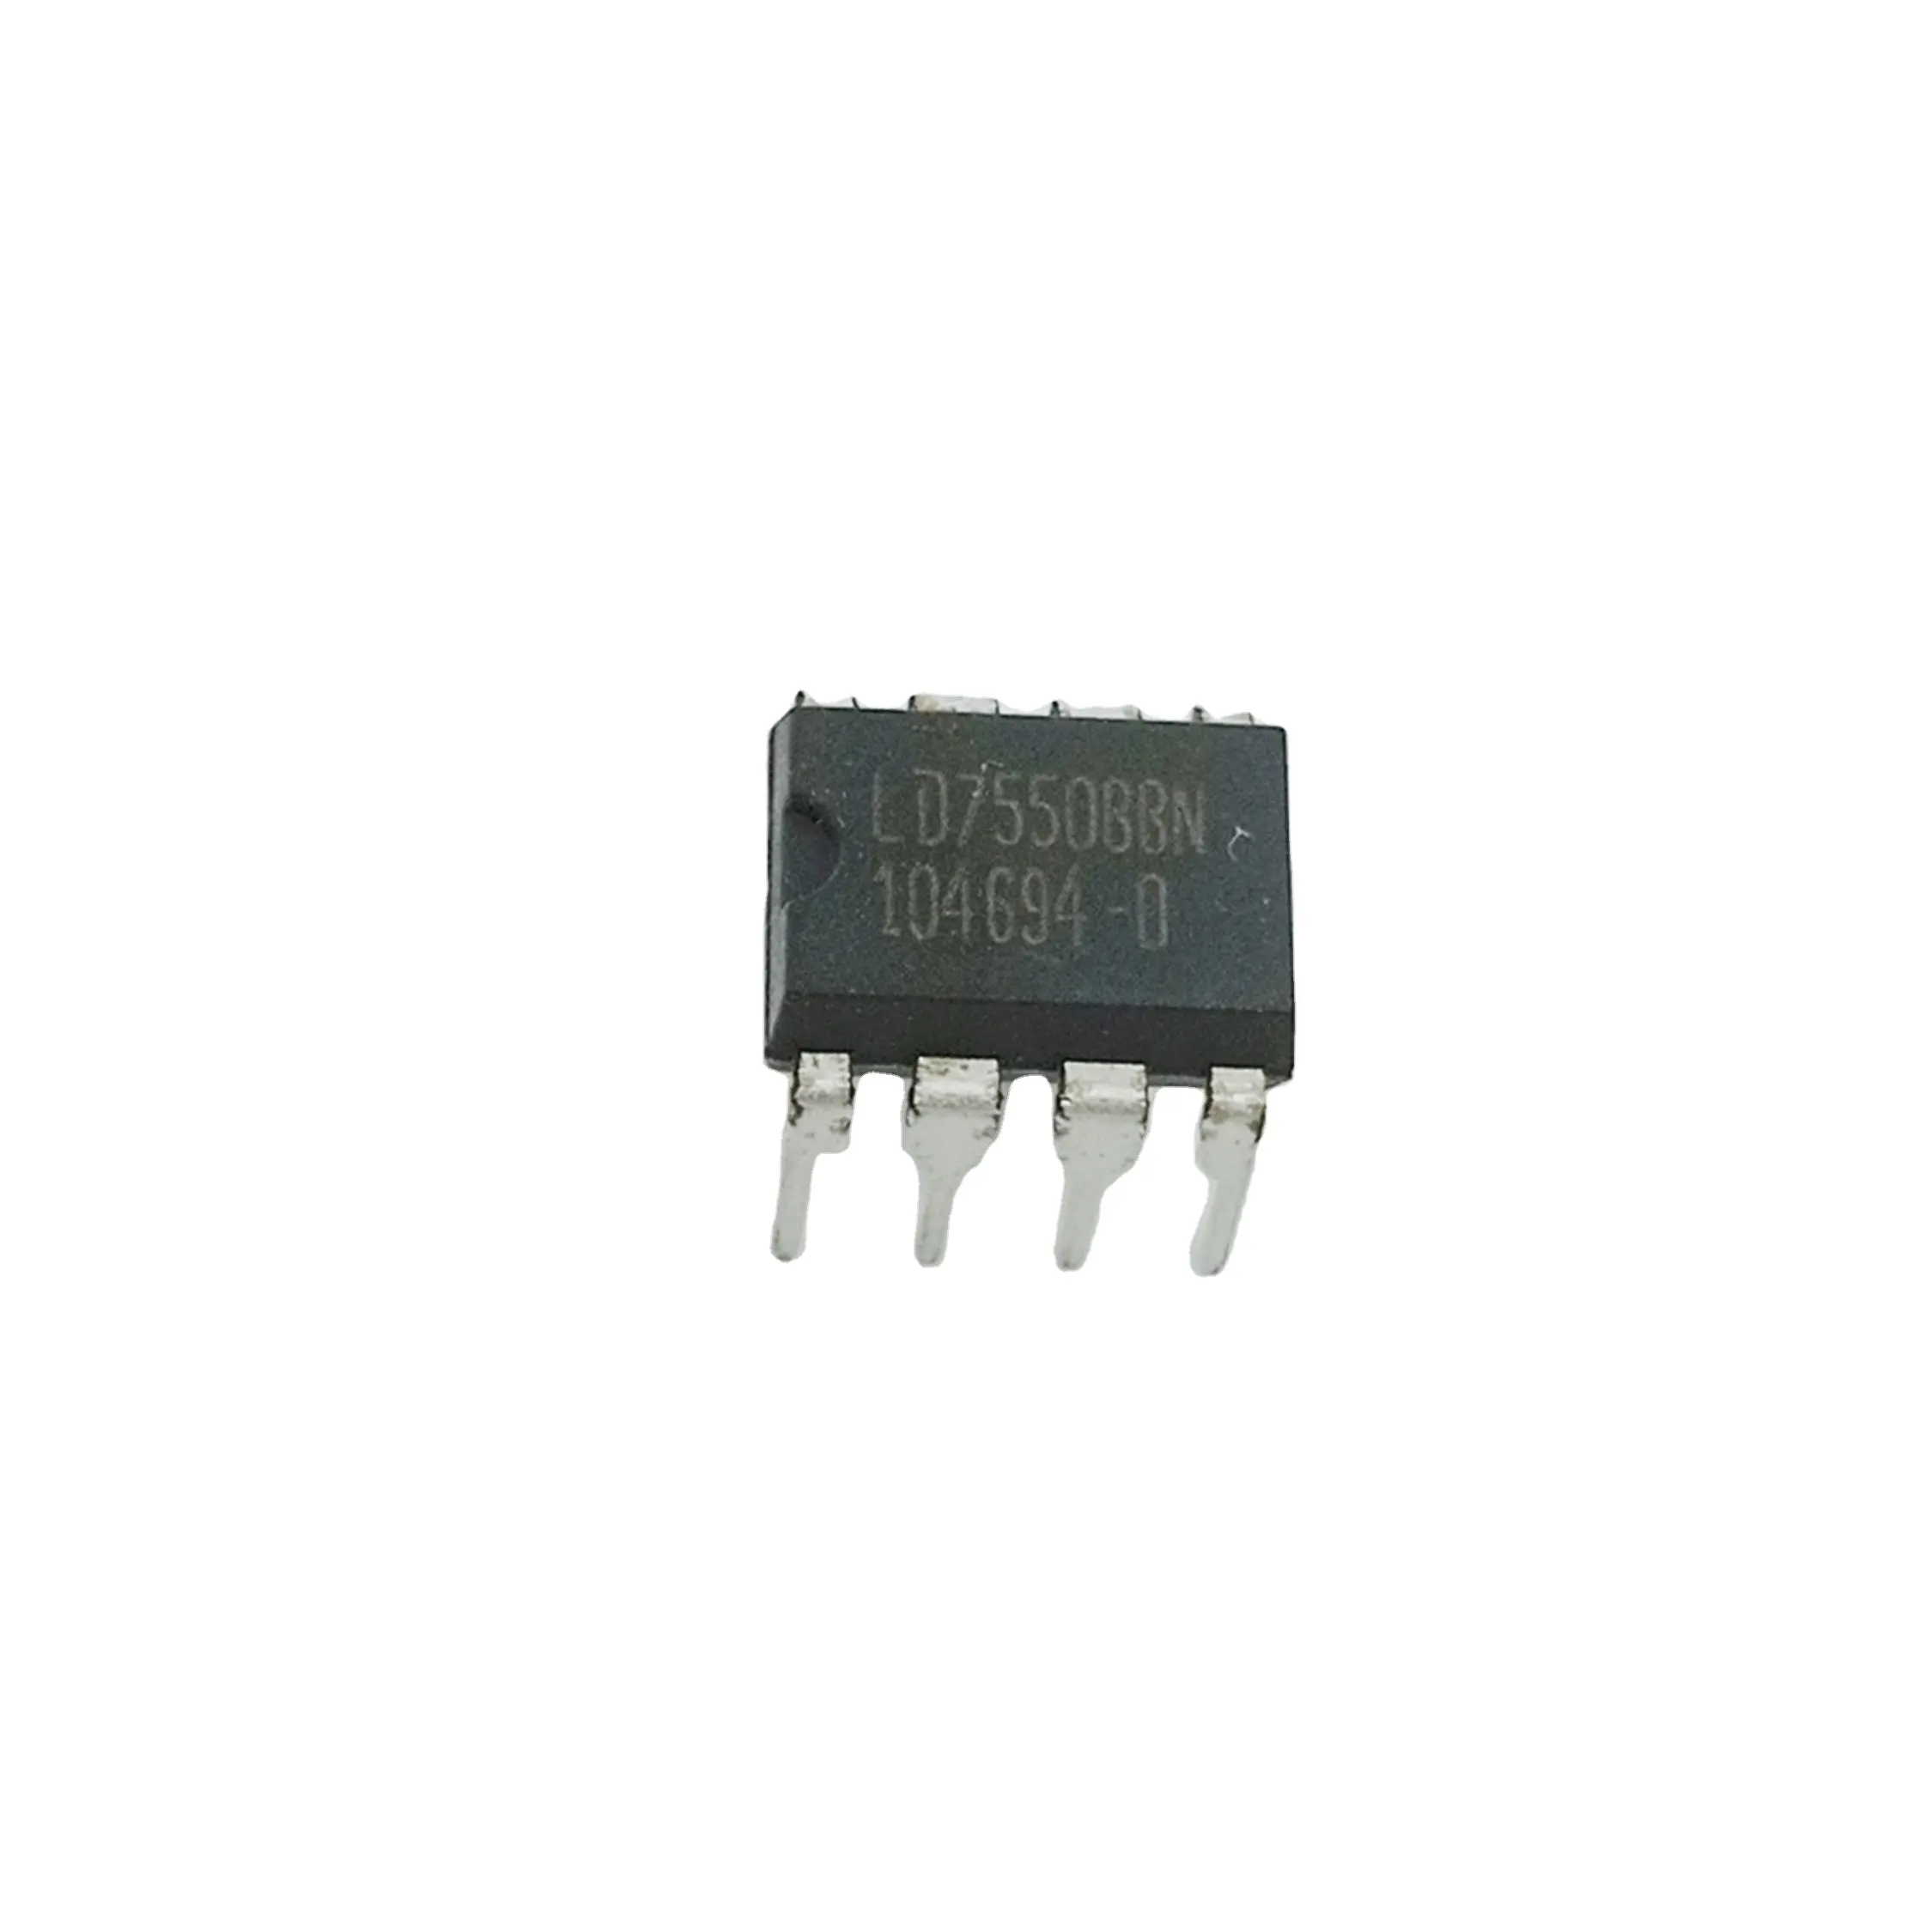 Electronic Components AO4606 Original IC chip BOM List Service SOP8 AO4606 IN STOCK